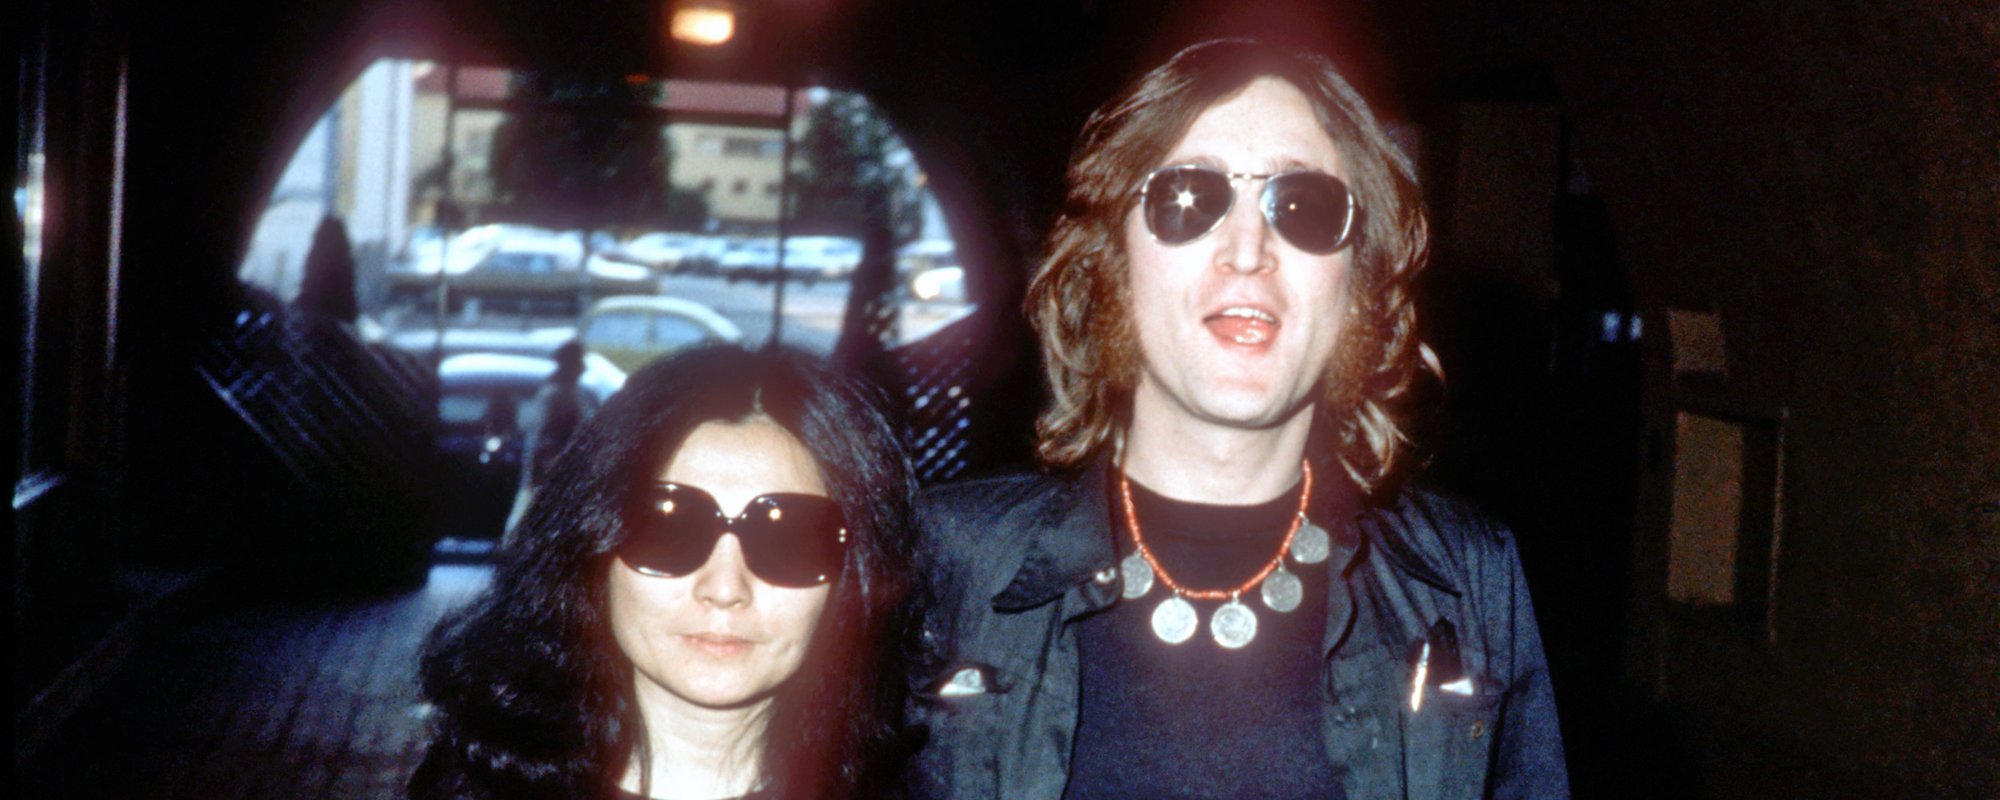 Ranking the 3 New Beatles Songs Released After John Lennon’s Death